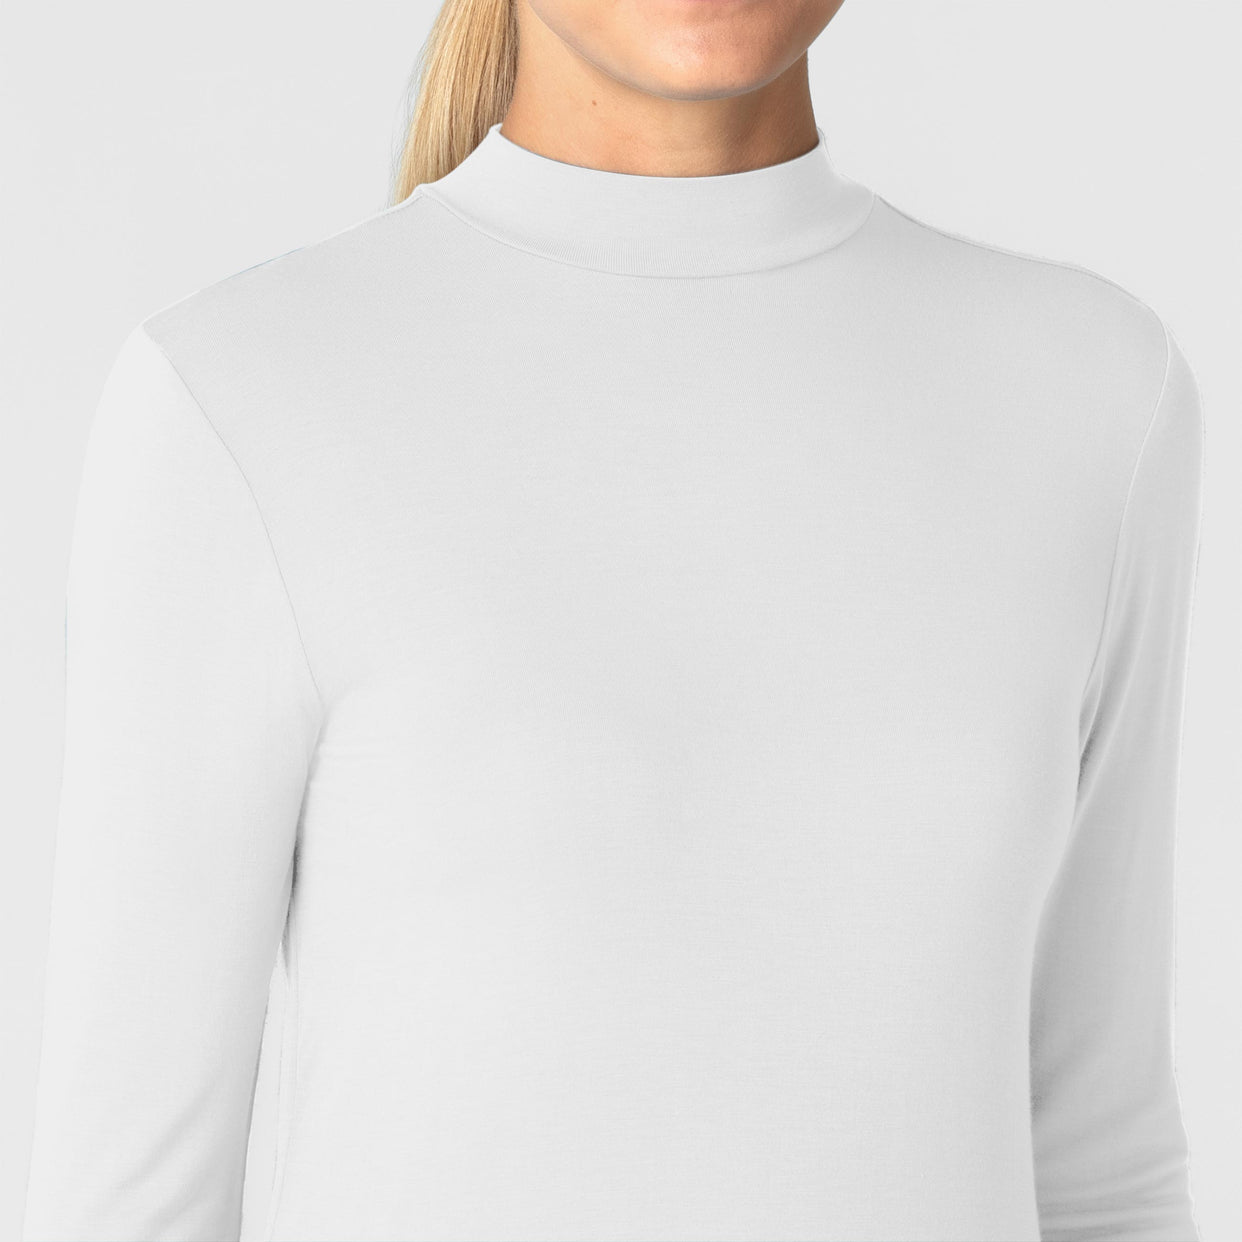 Knits and Layers Women’s Long Sleeve Mock Neck Silky Tee White front detail